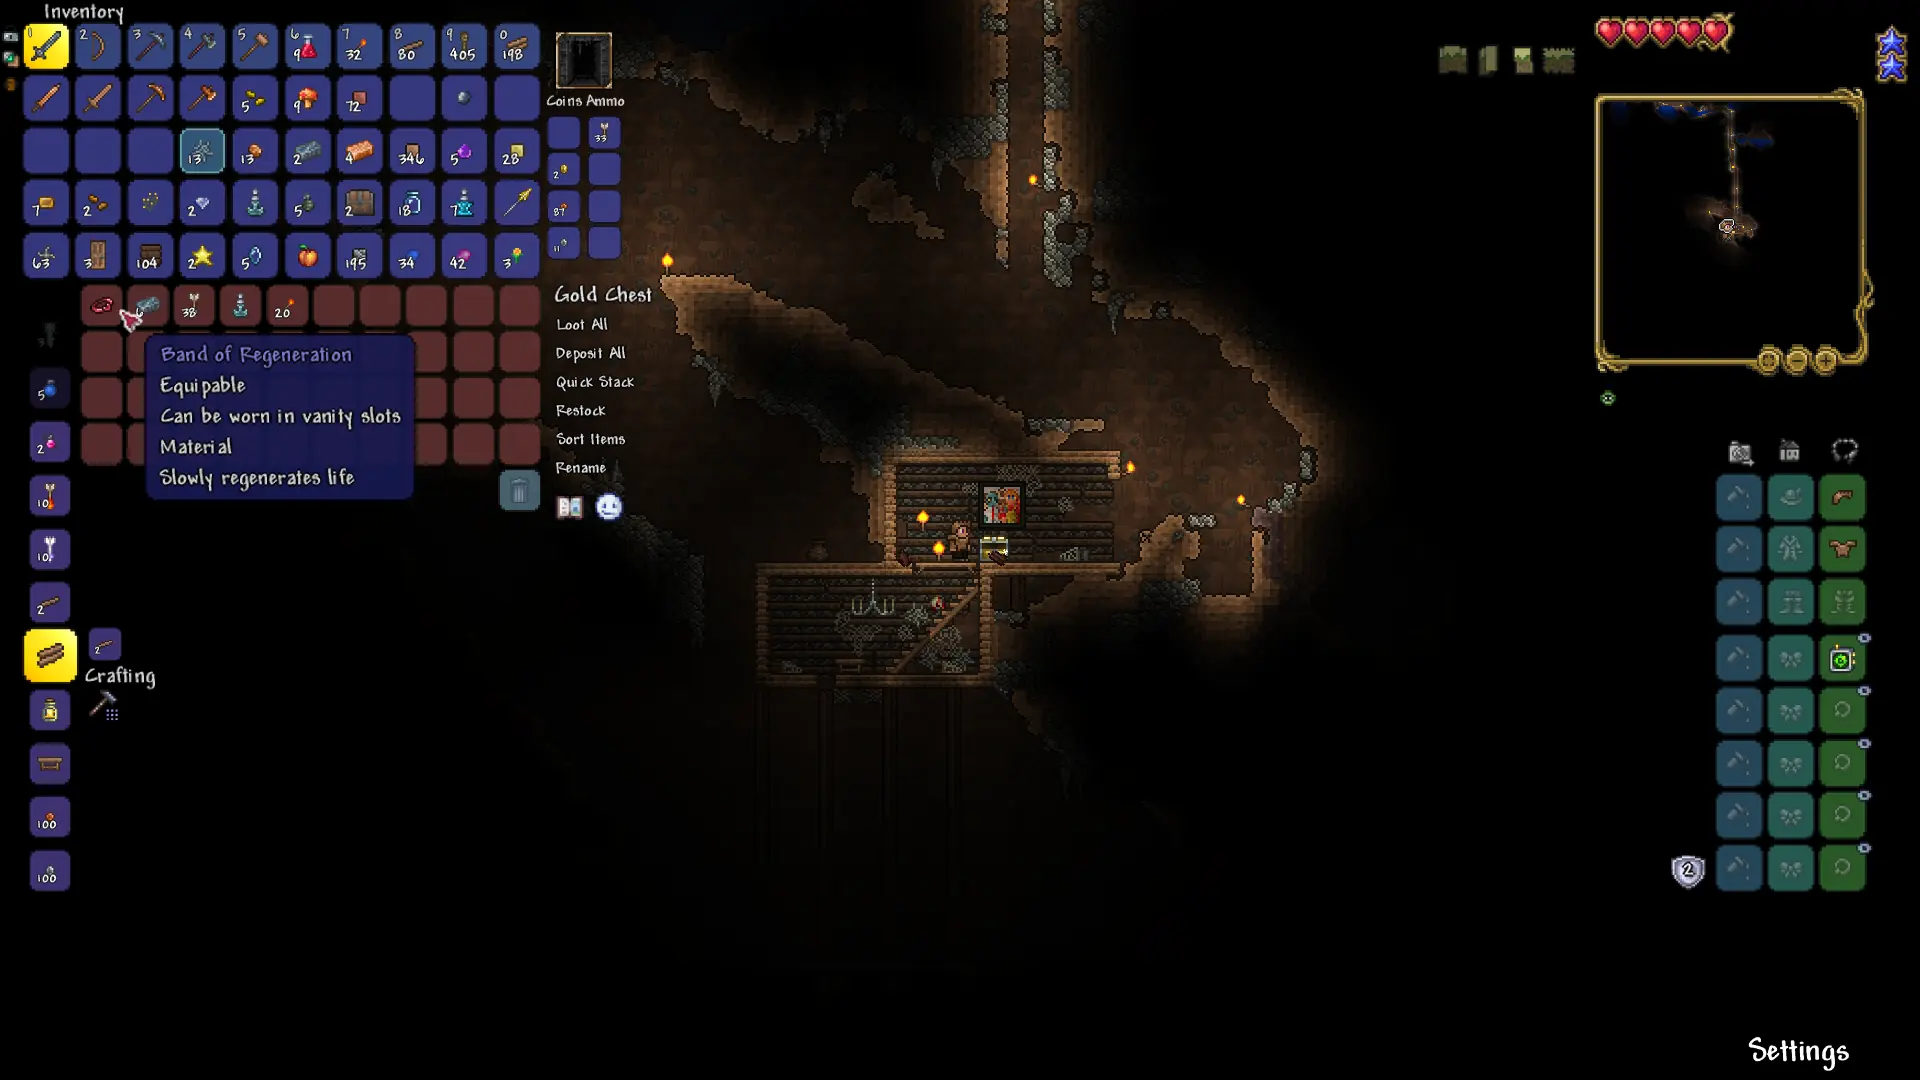 How to equip accessory in Terraria - The Click